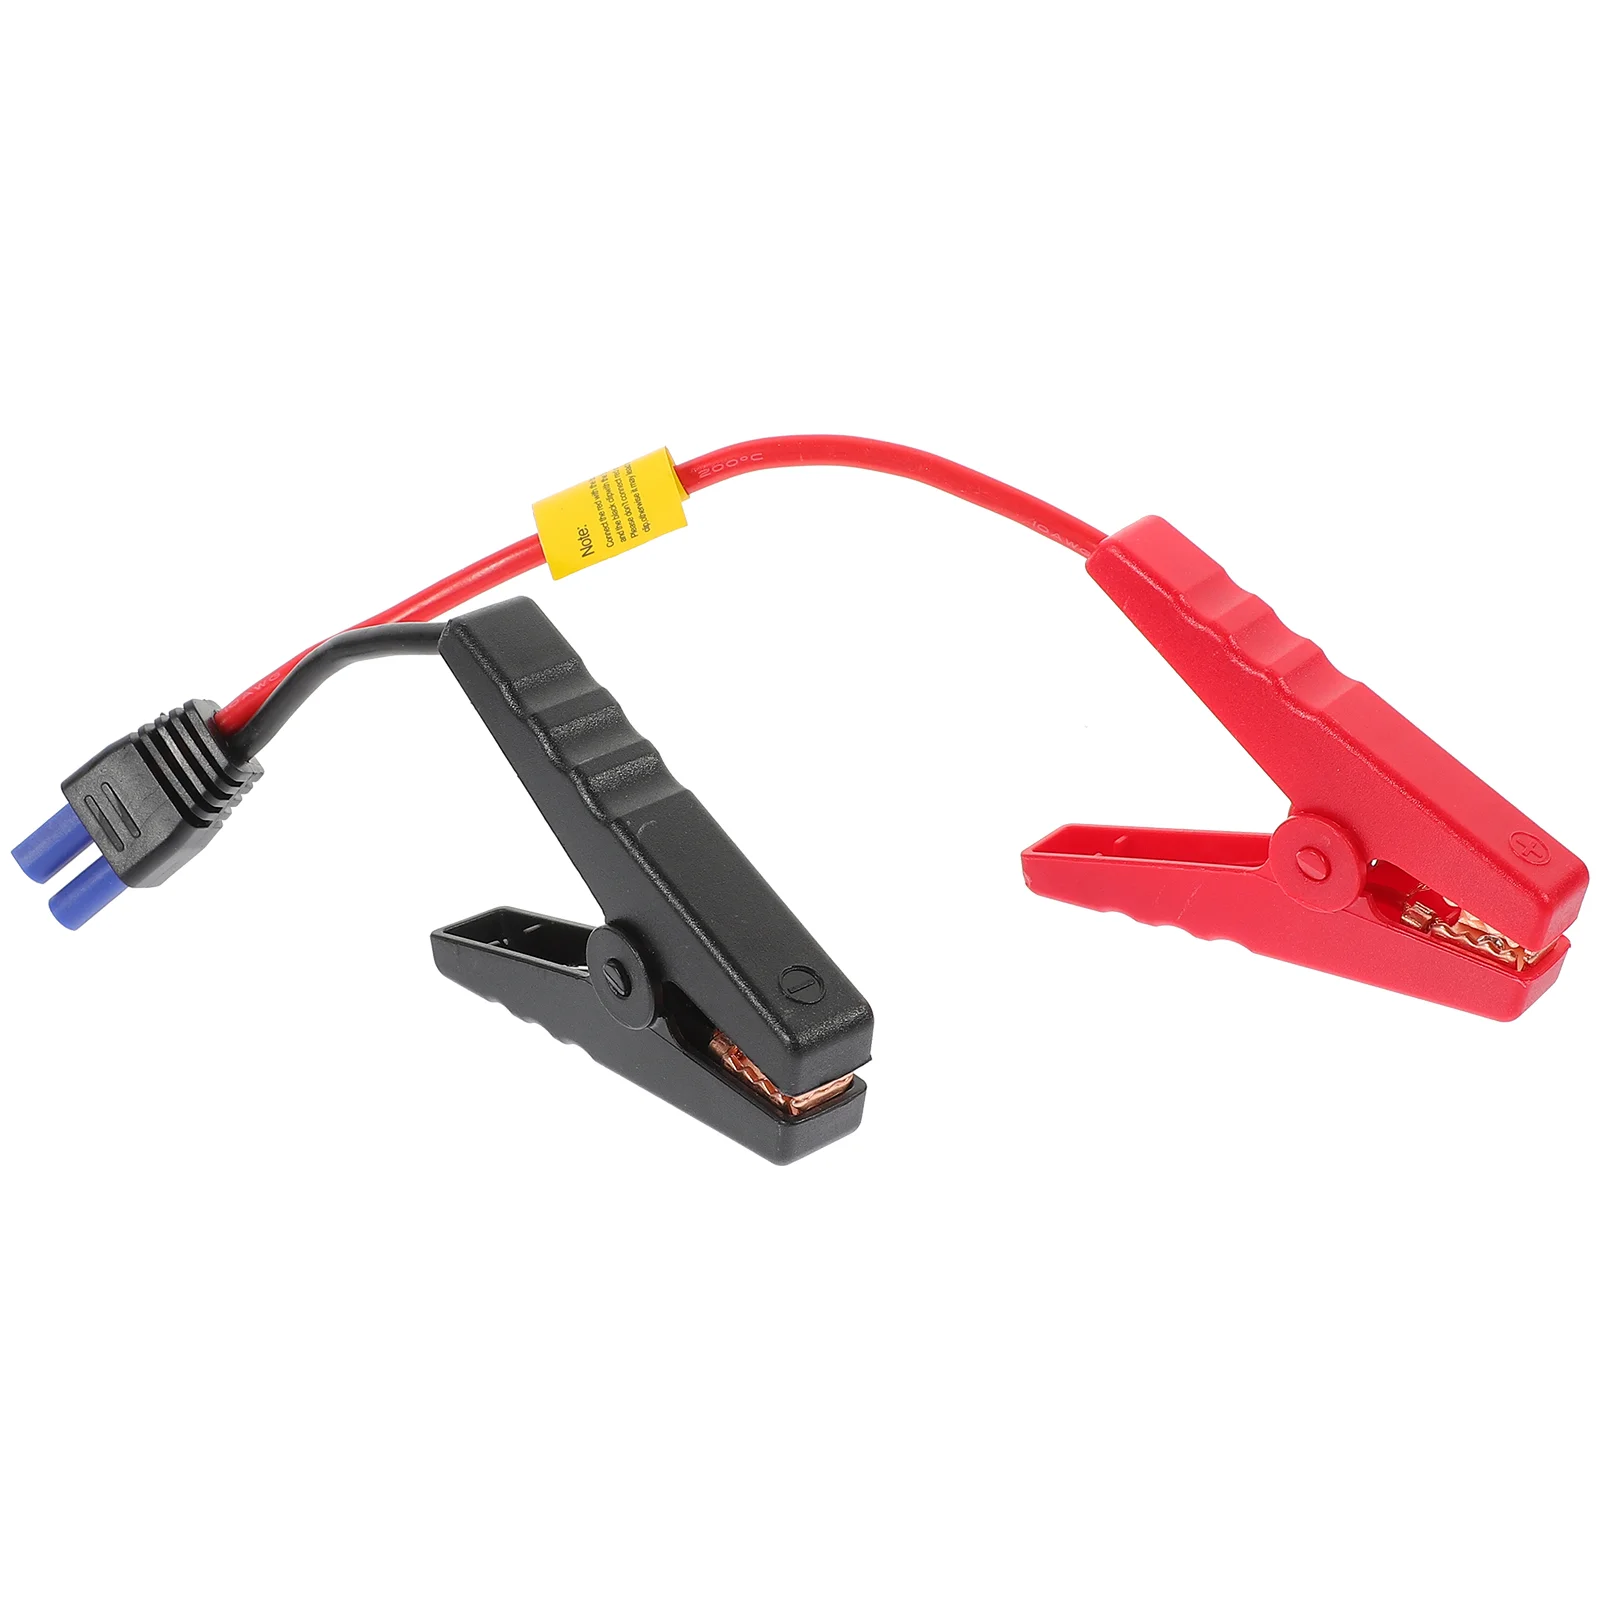 

EC5 Connector Auto Car Emergency Jumper Cable Wires Alligator Clamp Booster Clips For Universal Car Jump Starter